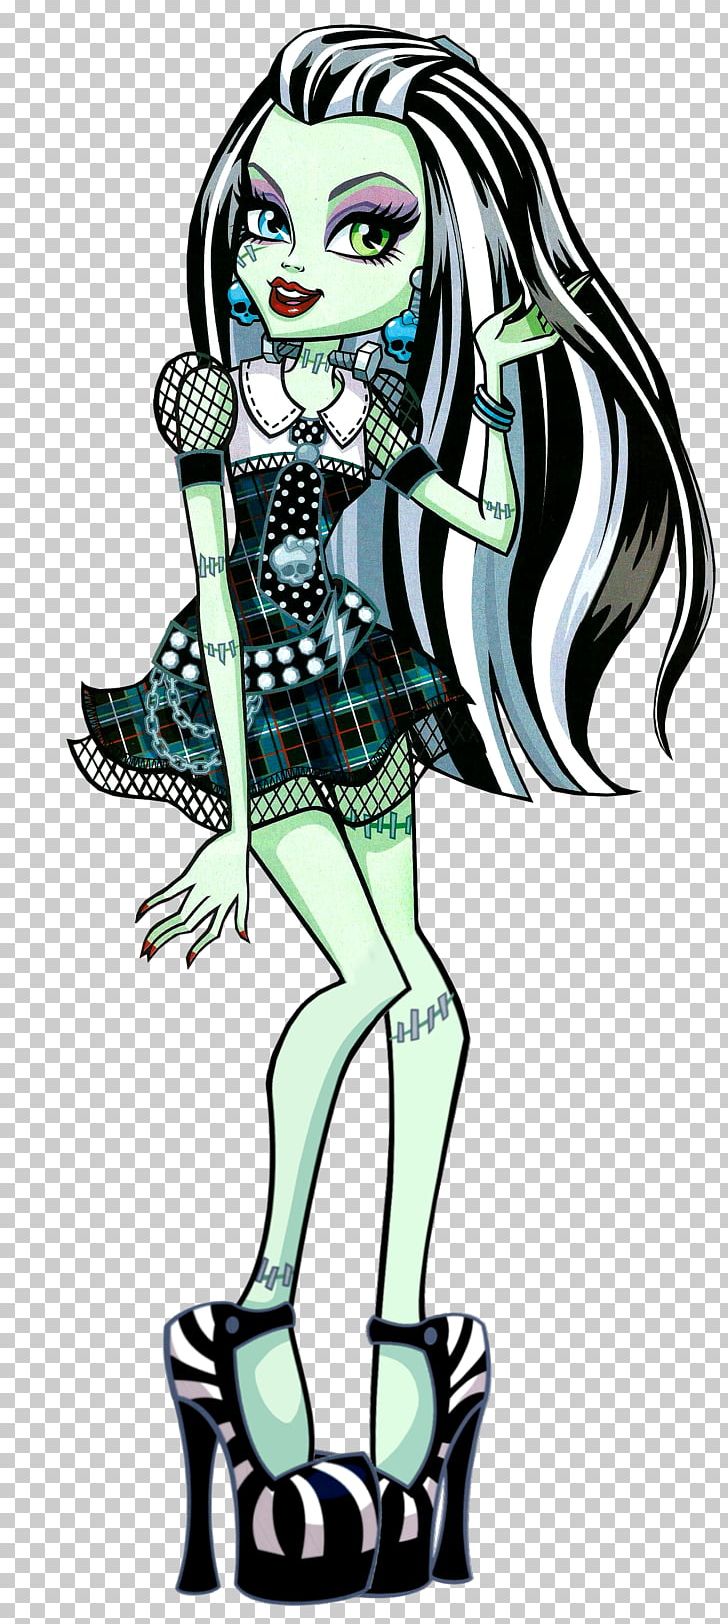 Frankie Stein Frankenstein's Monster Monster High Character PNG, Clipart, Art, Cartoon, Doll, Ever After High, Fantasy Free PNG Download